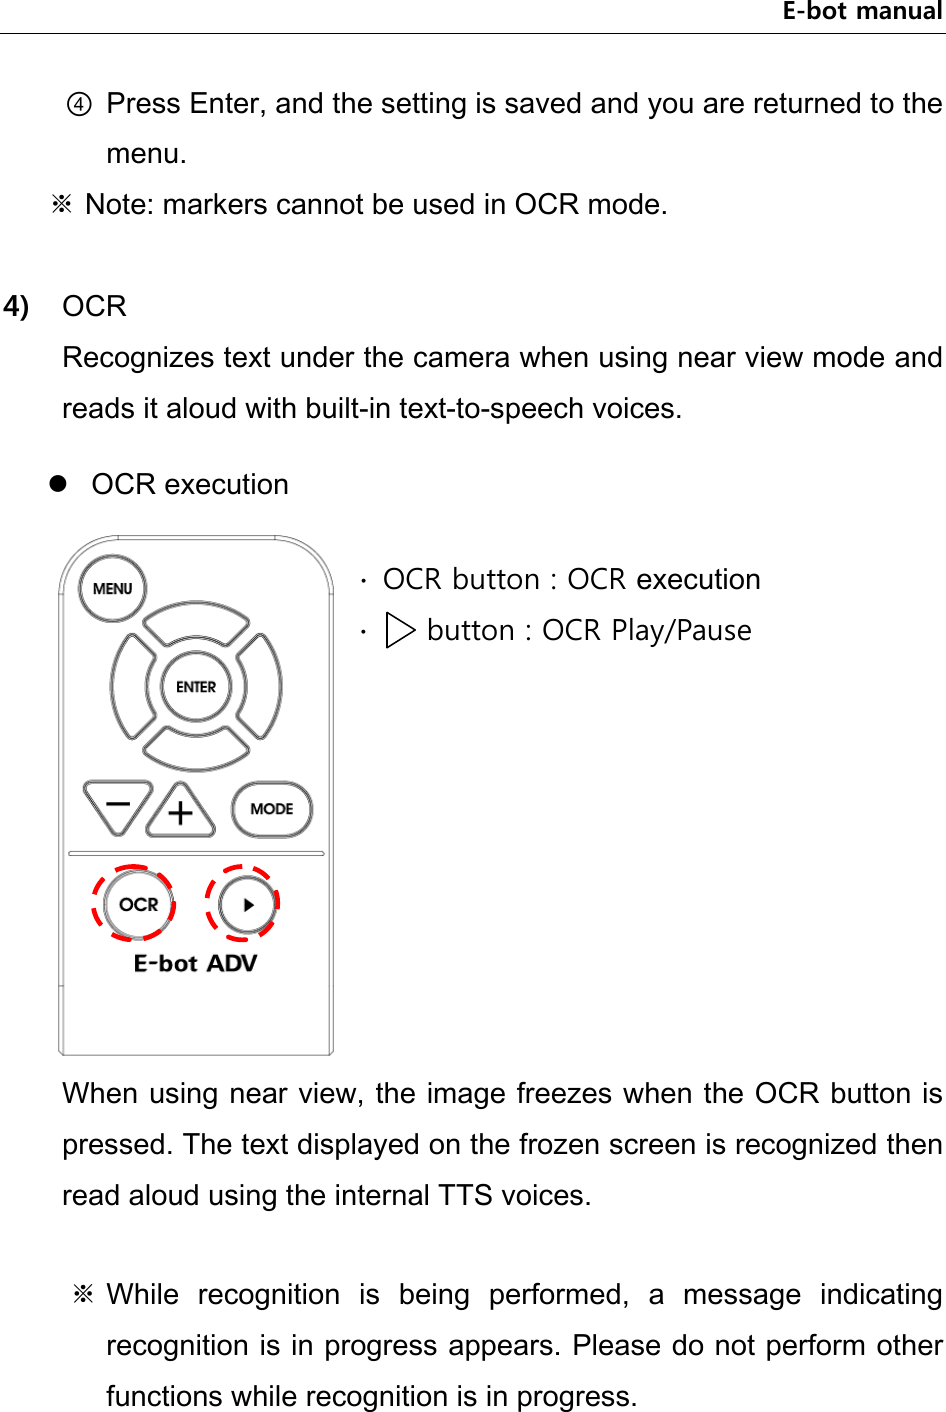 E-bot manual ④ Press Enter, and the setting is saved and you are returned to the menu.   ※ Note: markers cannot be used in OCR mode.  4) OCR Recognizes text under the camera when using near view mode and reads it aloud with built-in text-to-speech voices.  OCR execution  When using near view, the image freezes when the OCR button is pressed. The text displayed on the frozen screen is recognized then read aloud using the internal TTS voices.  ※ While  recognition  is  being  performed,  a  message  indicating recognition is in progress appears. Please do not perform other functions while recognition is in progress.    ∙  OCR button : OCR execution ∙    button : OCR Play/Pause  